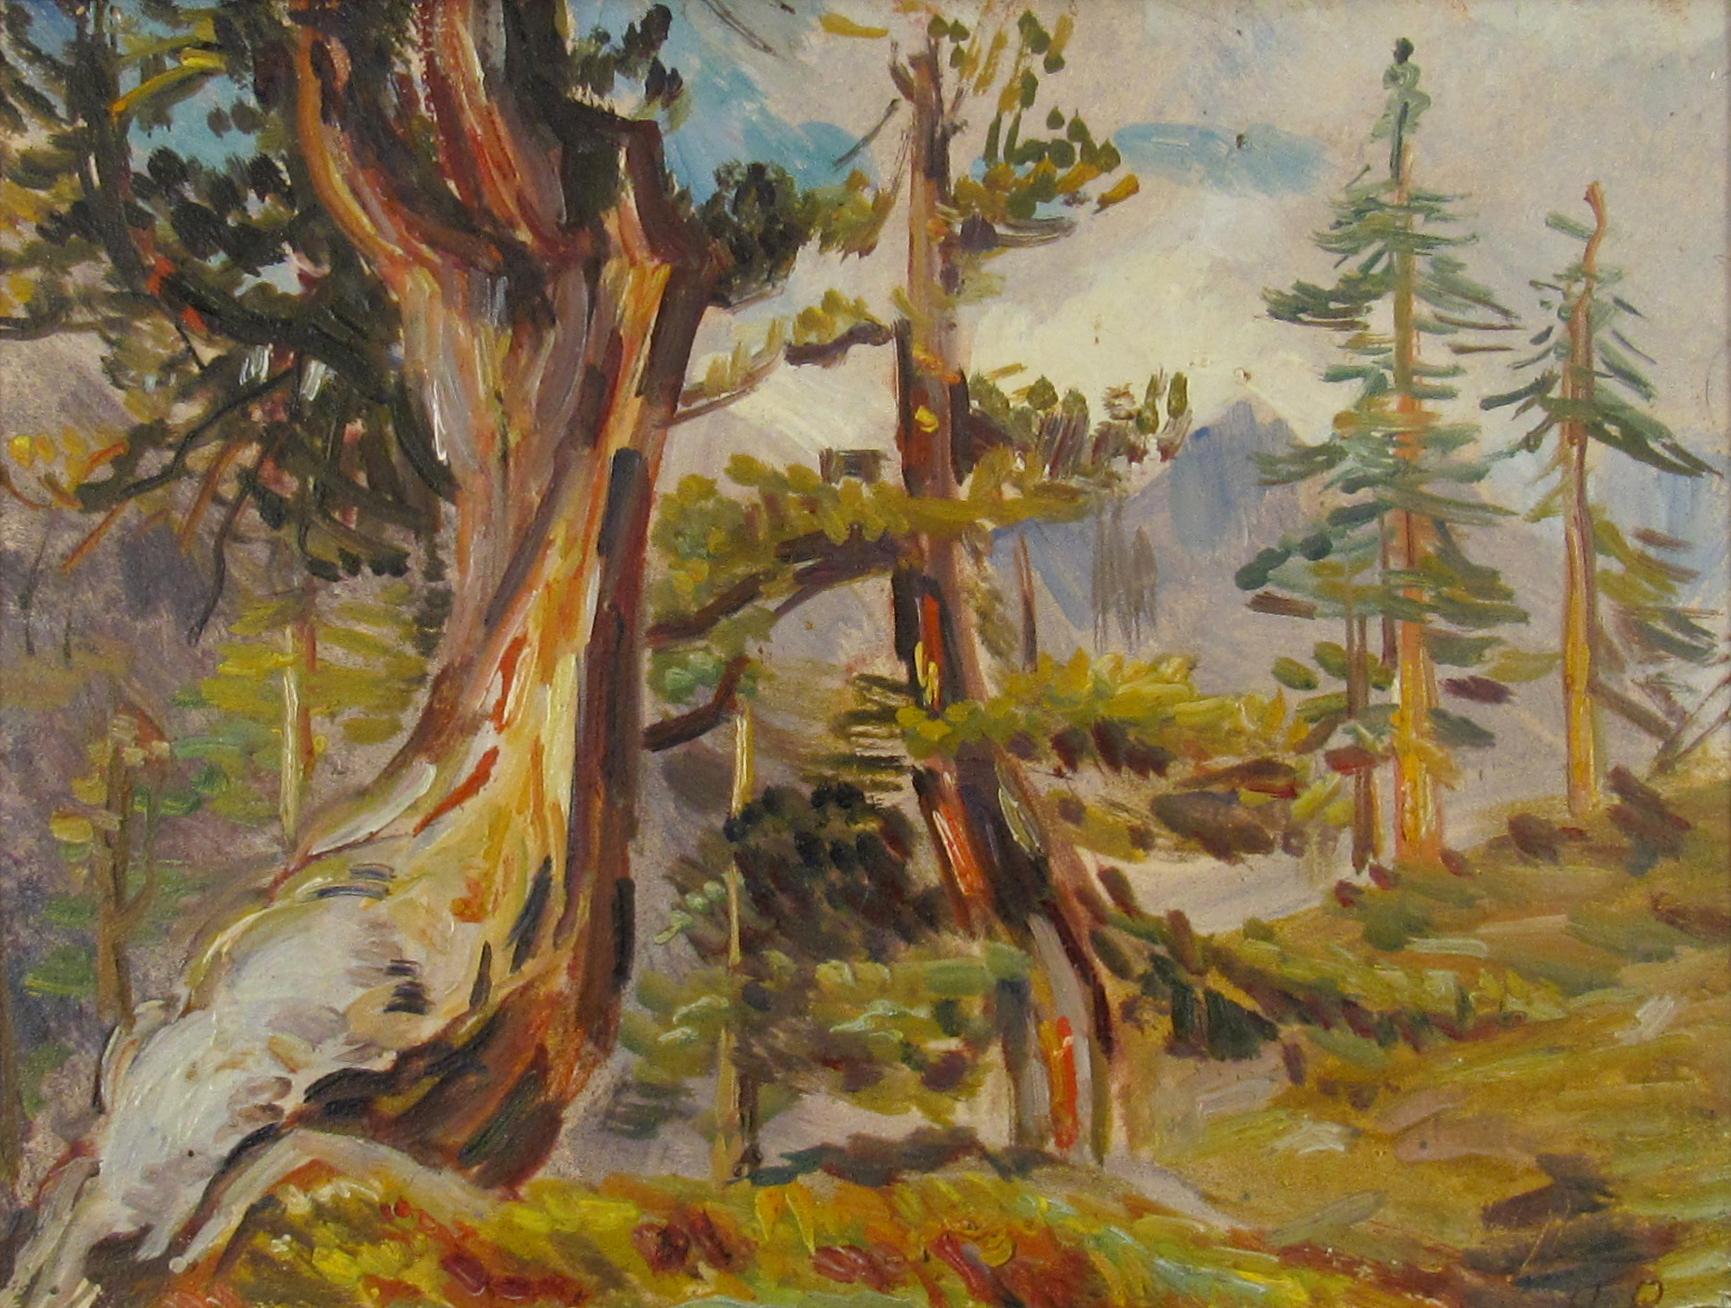 Hanni Bay (Swiss, 1885 - 1978) Alpine Forrest Switzerland Oil painting on board - Painting by Hanny Bay